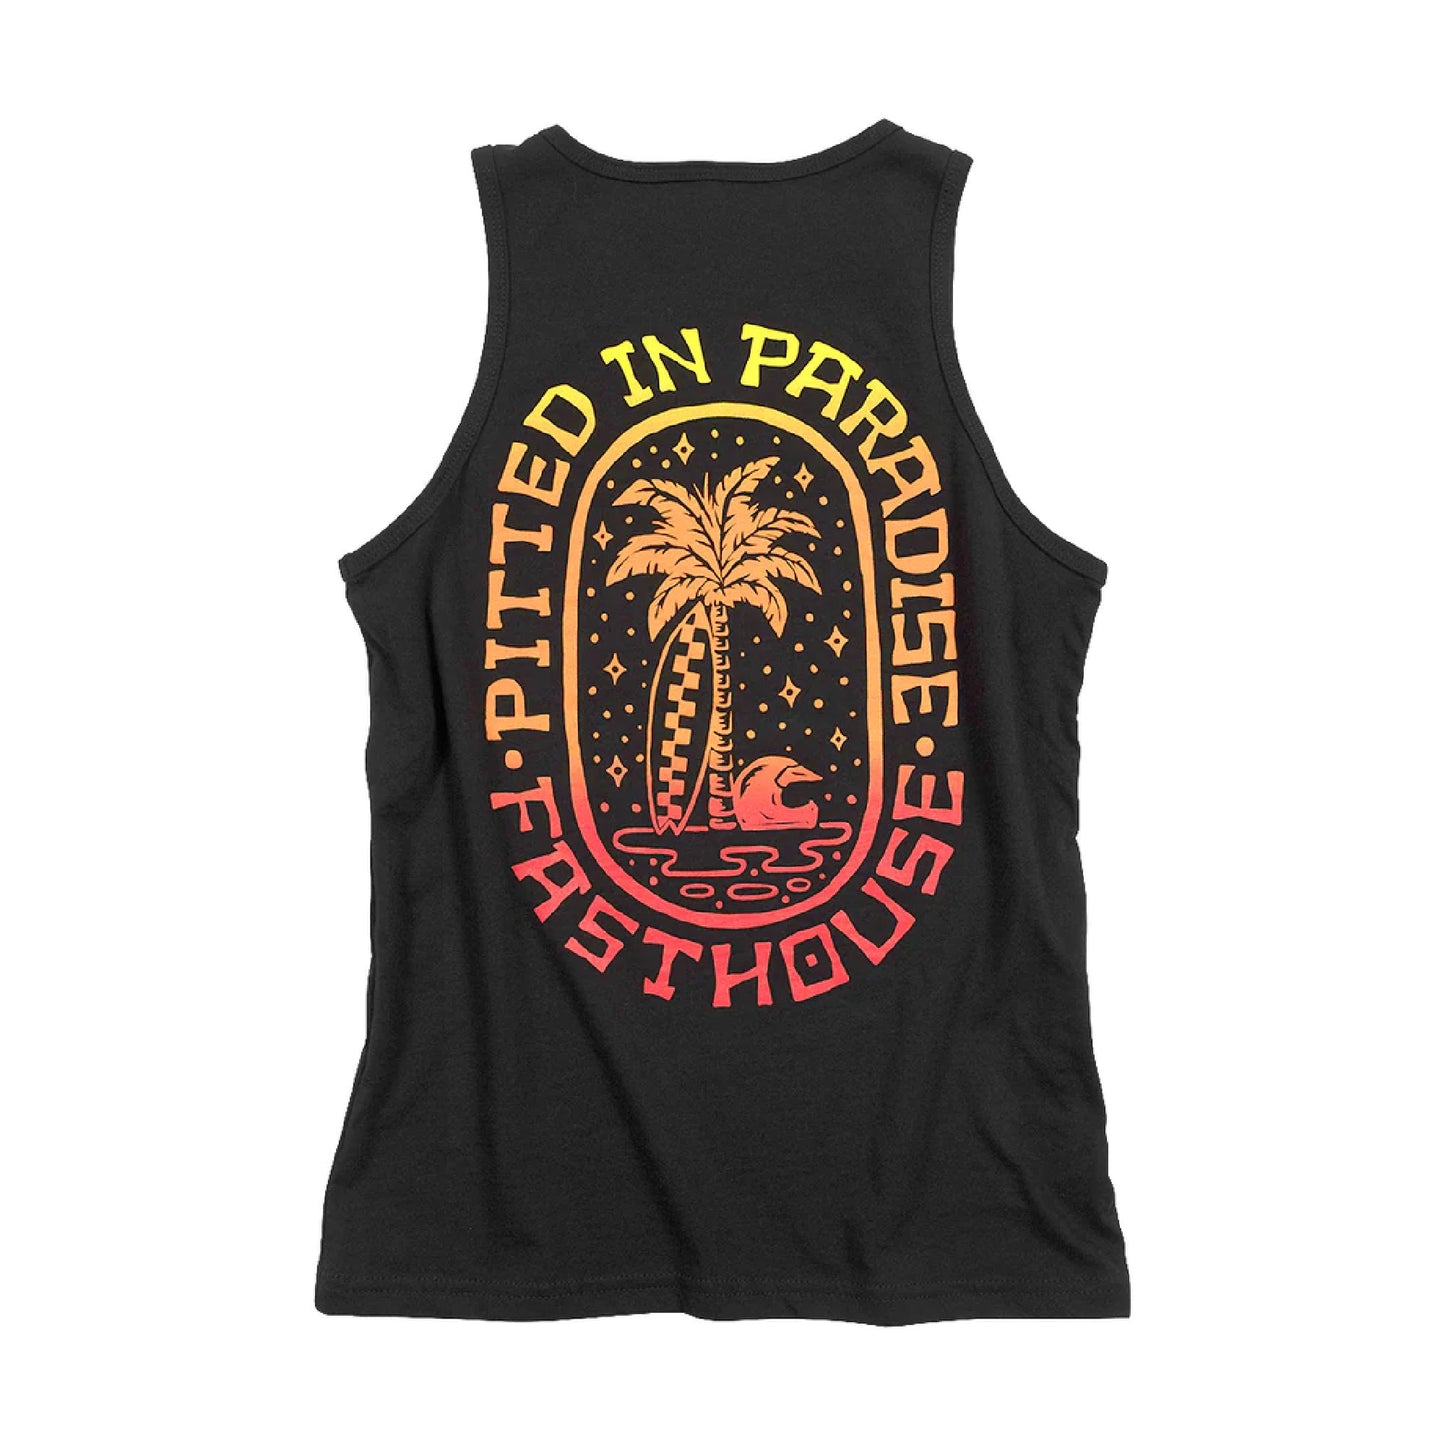 Fasthouse Youth Palm Tank Black Tank Top